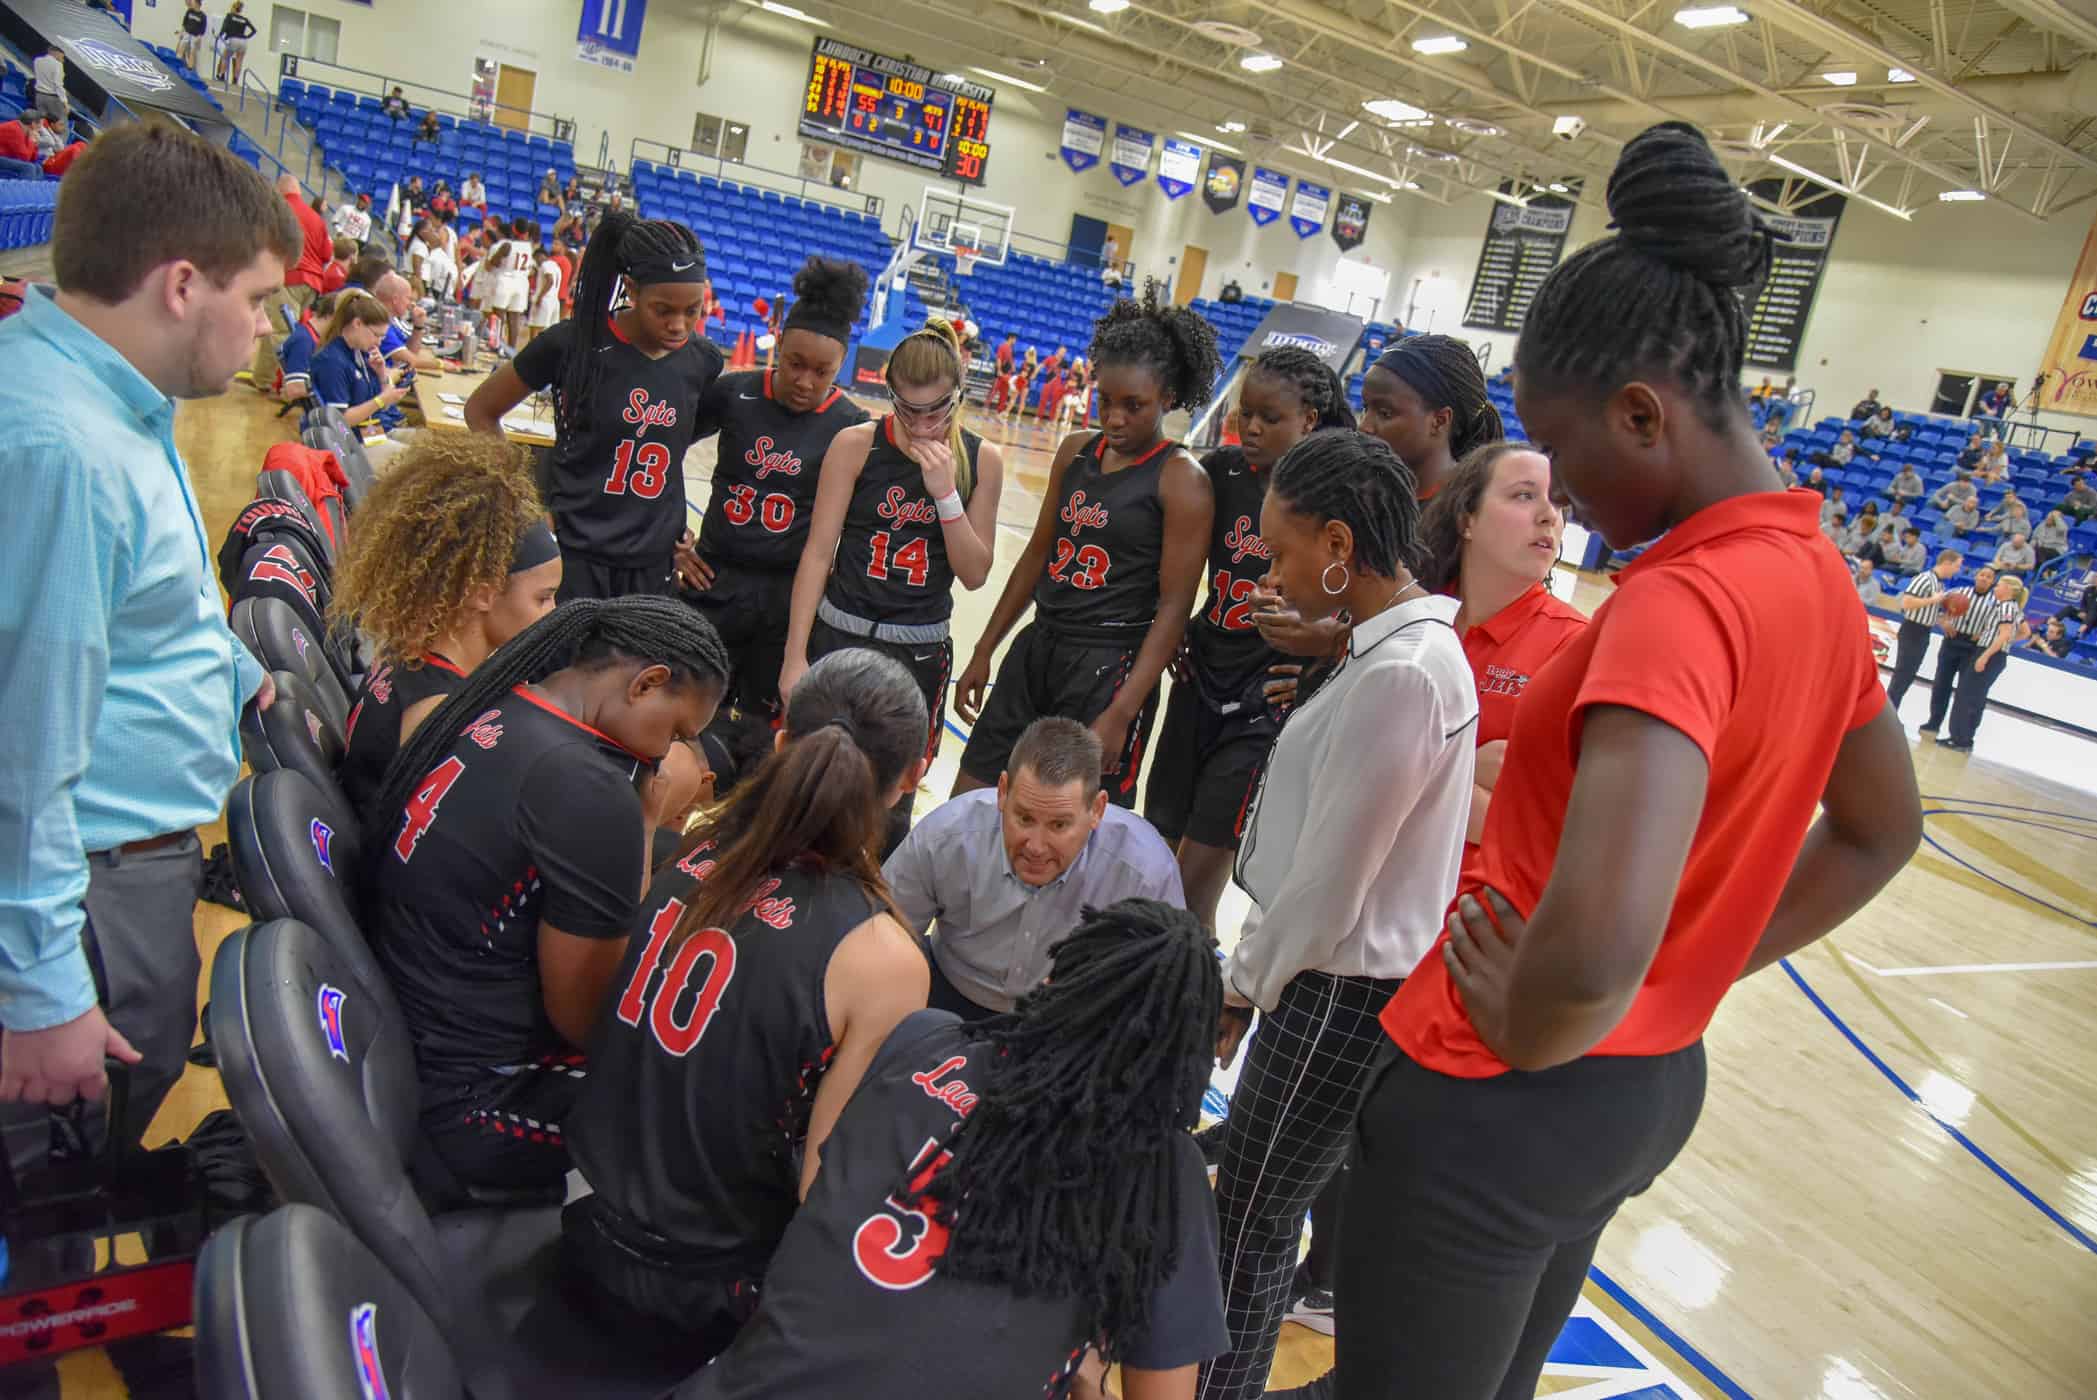 Lady Jets head coach James Frey talks strategy with the team during a timeout.